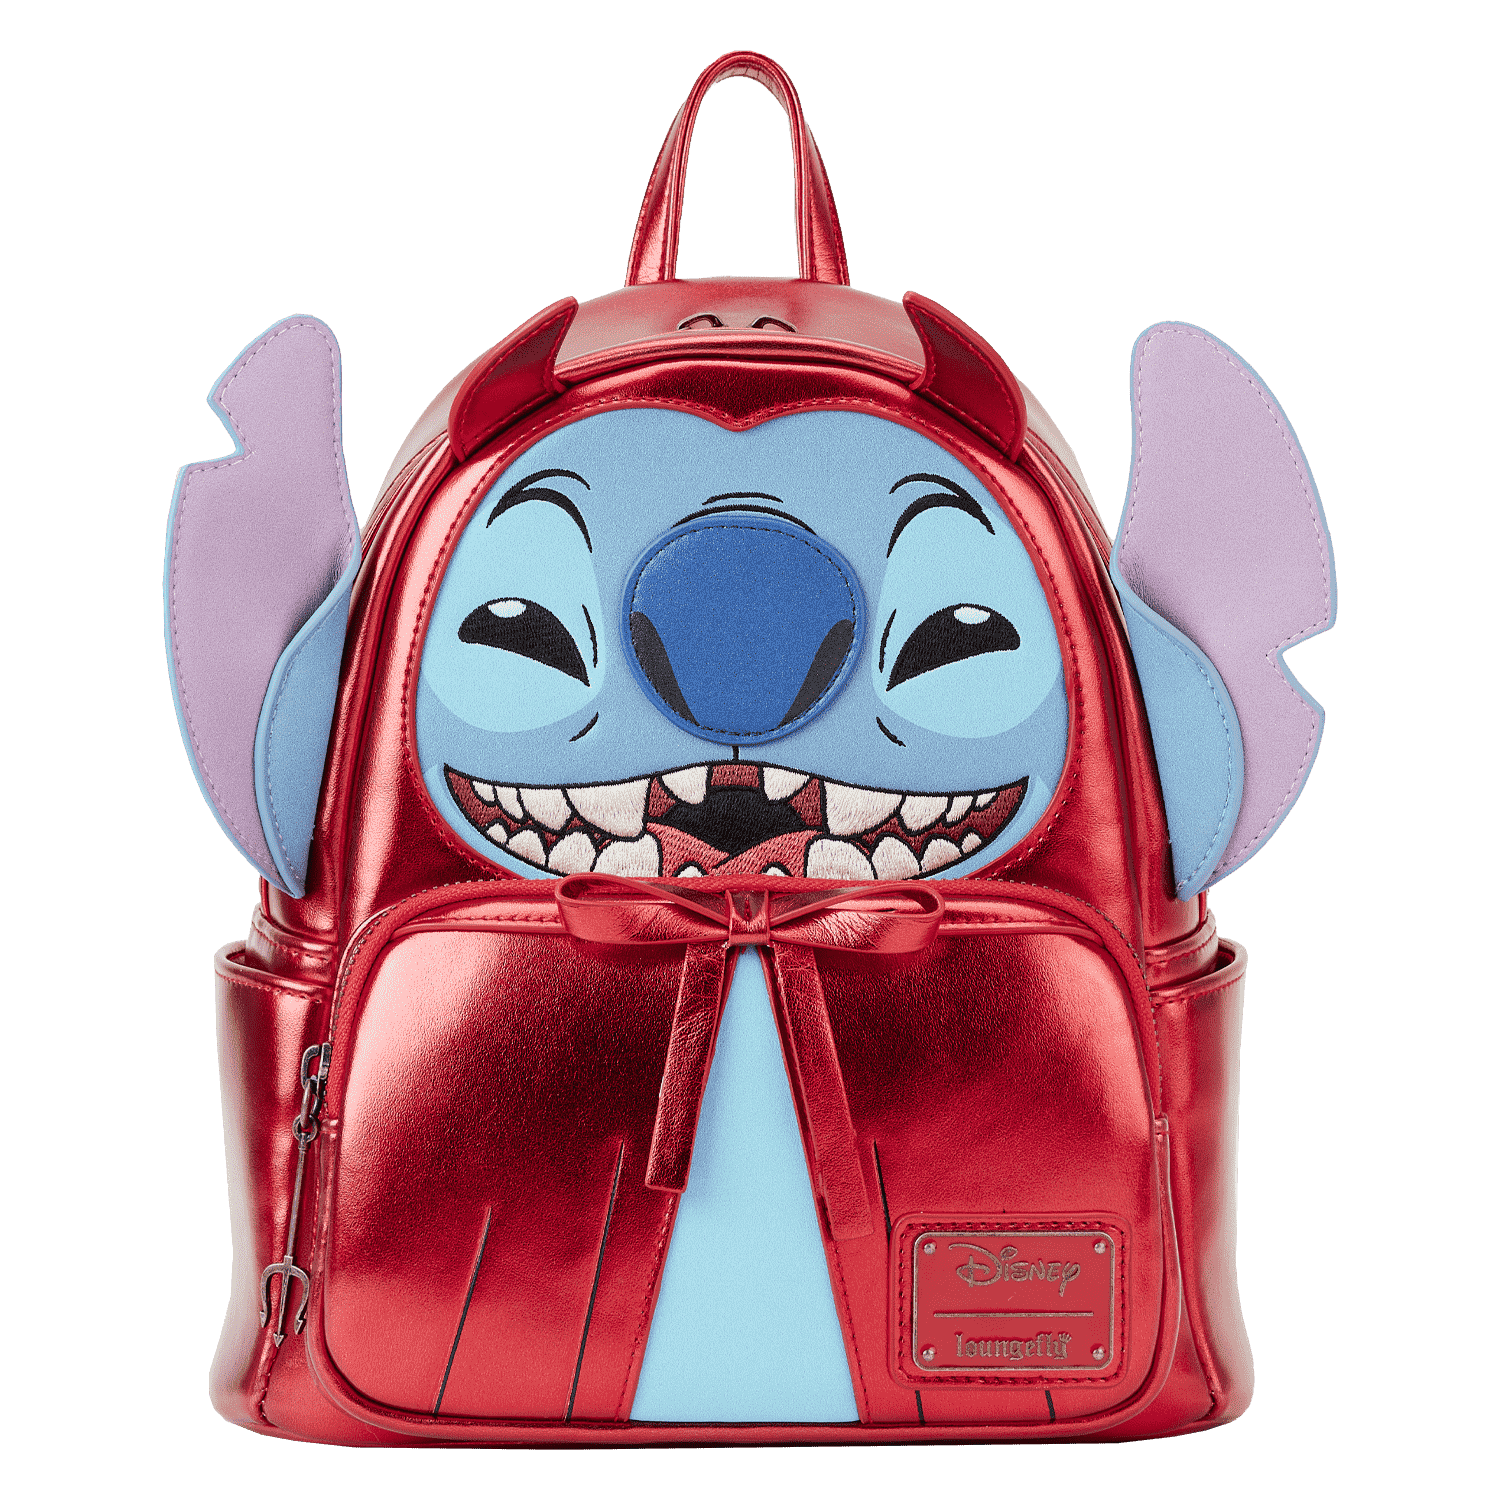 Buy Stitch Devil Cosplay Mini Backpack at Loungefly.